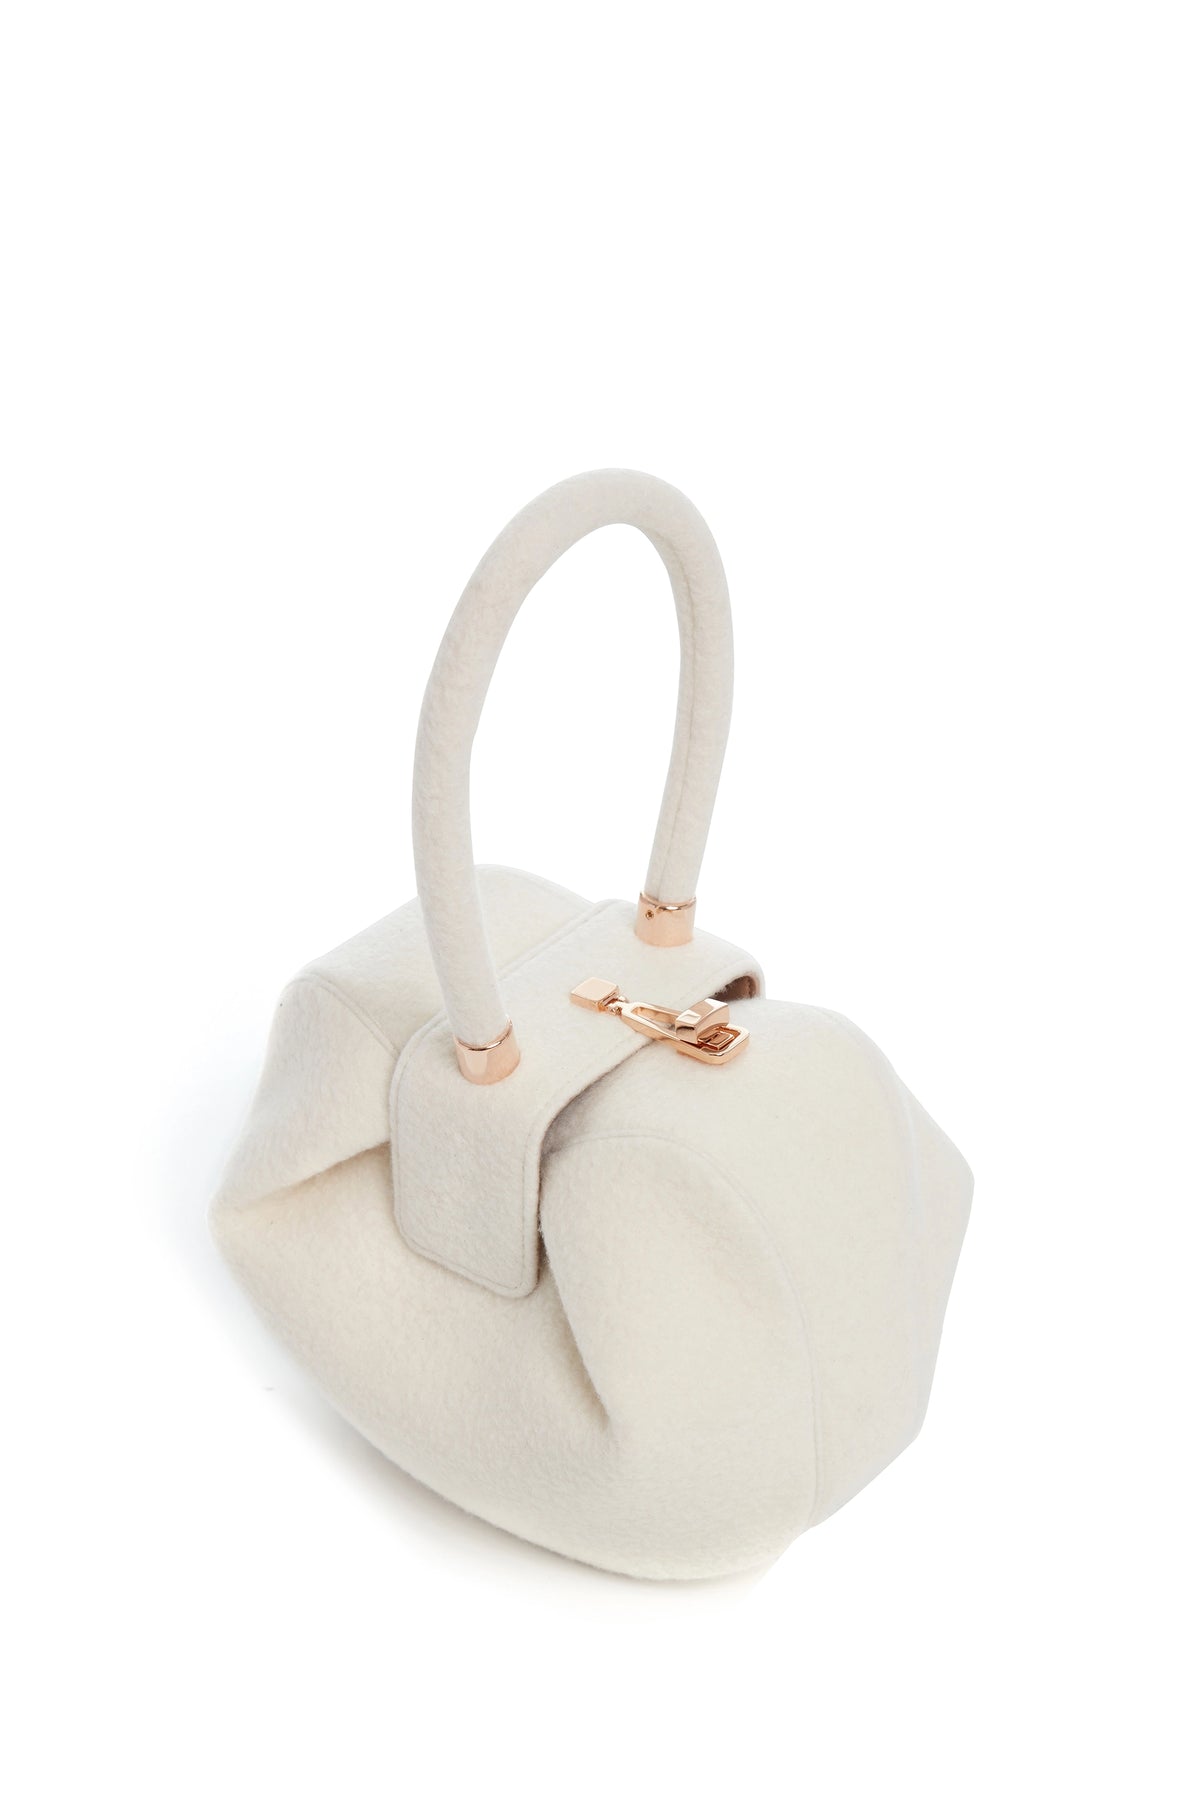 Carry Everything Small cashmere tote bag in white - Loro Piana | Mytheresa